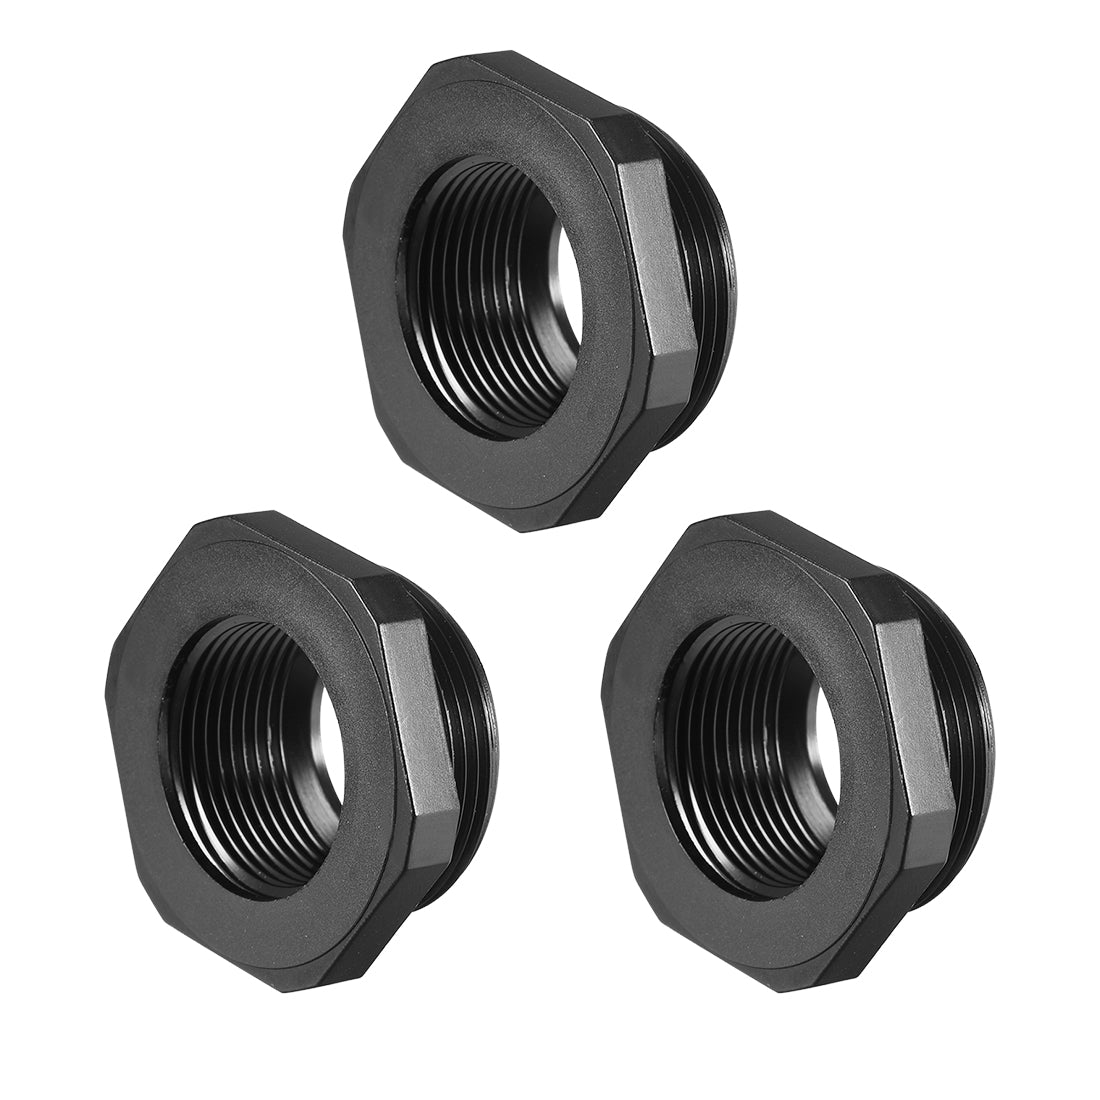 uxcell Uxcell Threaded Reducing Bushings Nylon Connector Adaptor M32 Male Thread to M25 Female Thread Black , 3 Pcs